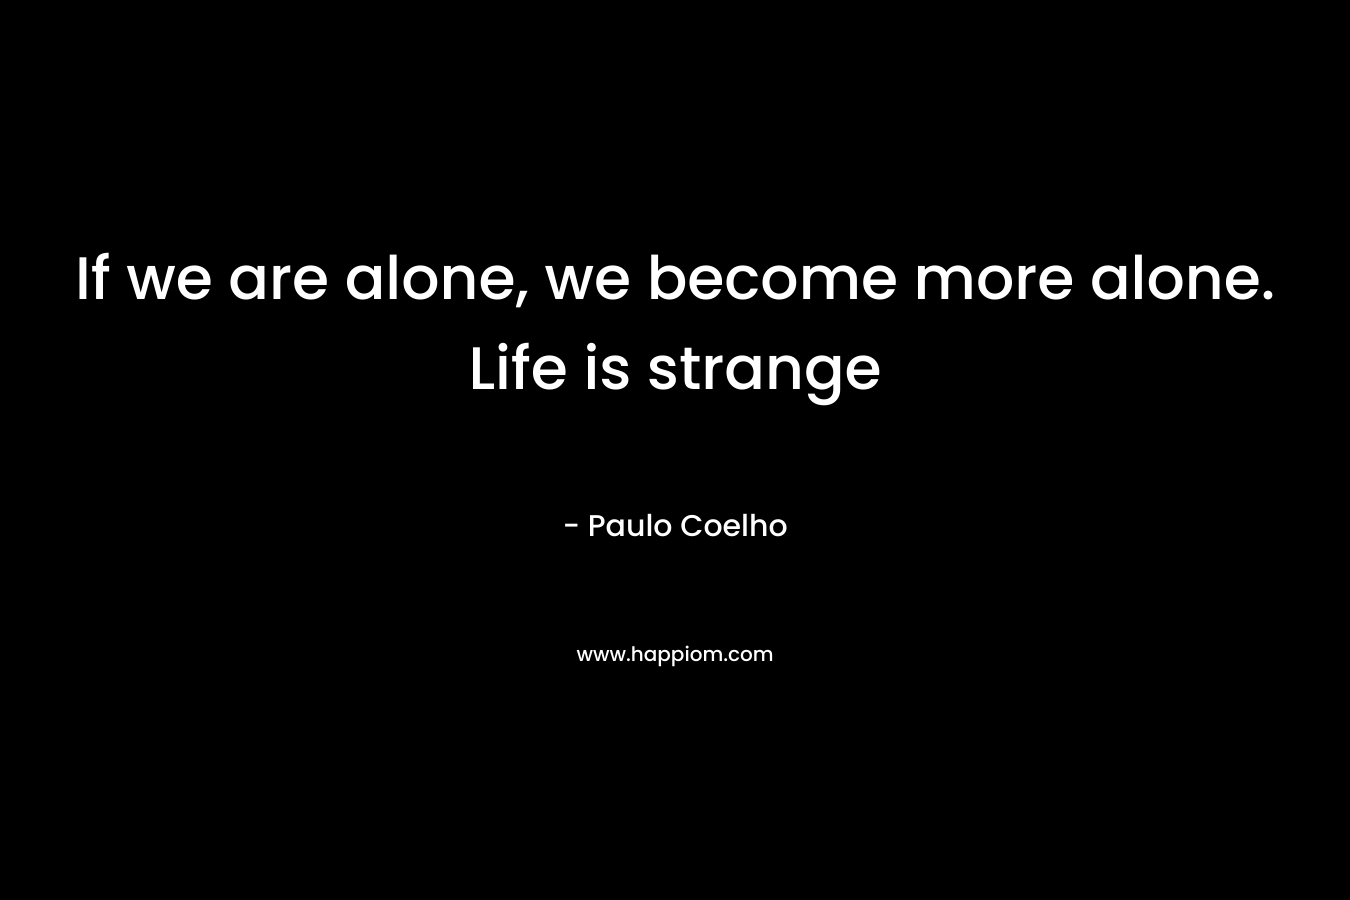 If we are alone, we become more alone. Life is strange